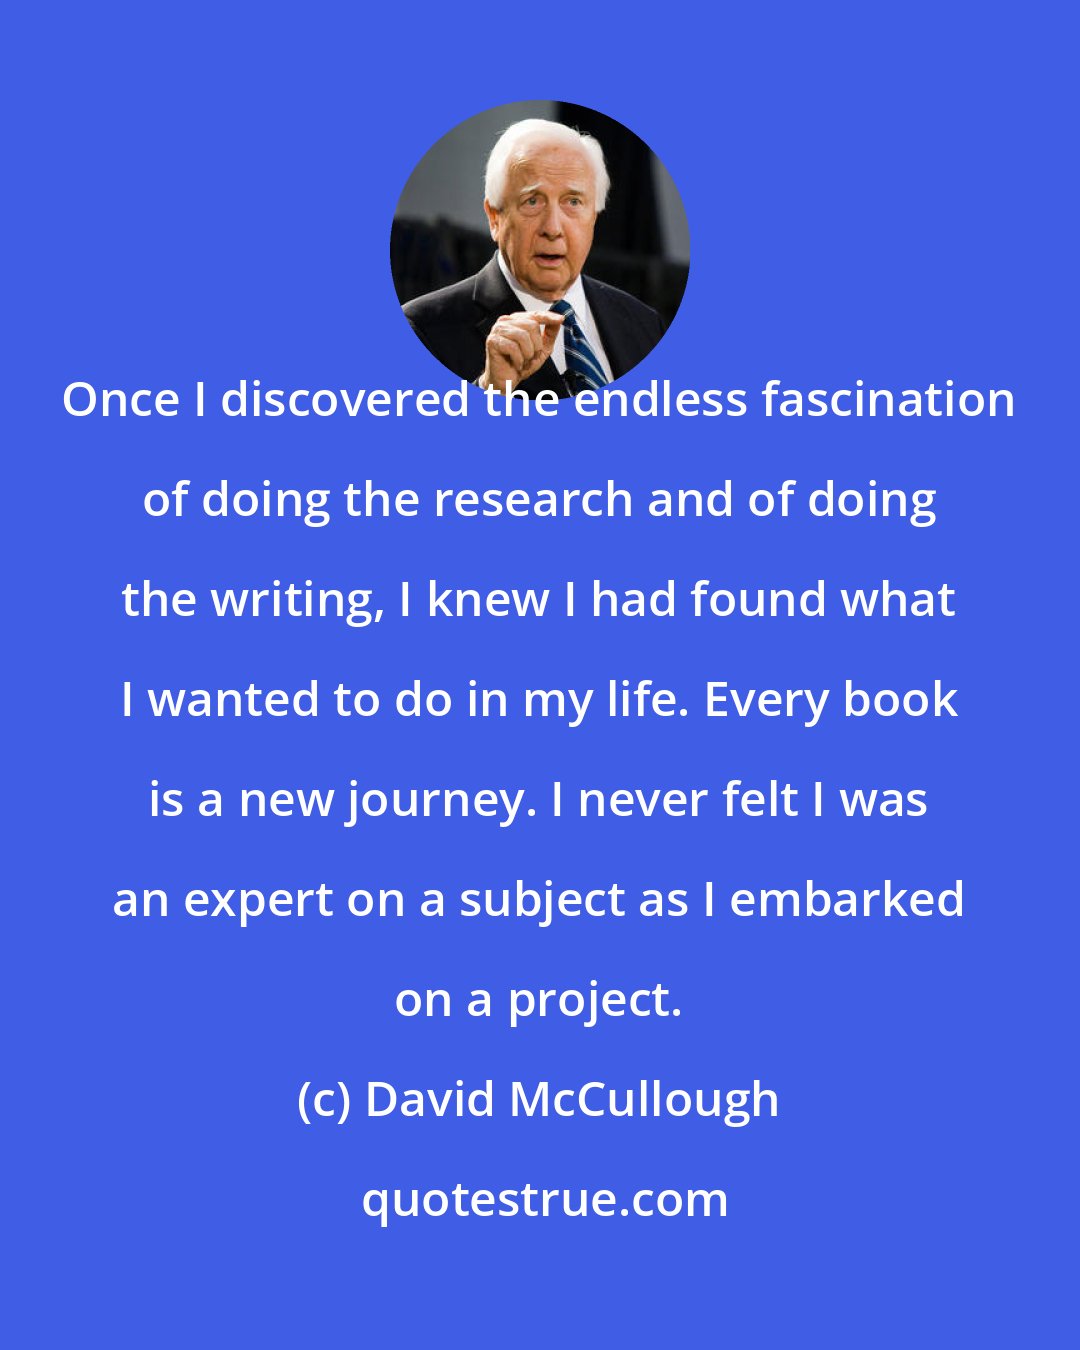 David McCullough: Once I discovered the endless fascination of doing the research and of doing the writing, I knew I had found what I wanted to do in my life. Every book is a new journey. I never felt I was an expert on a subject as I embarked on a project.